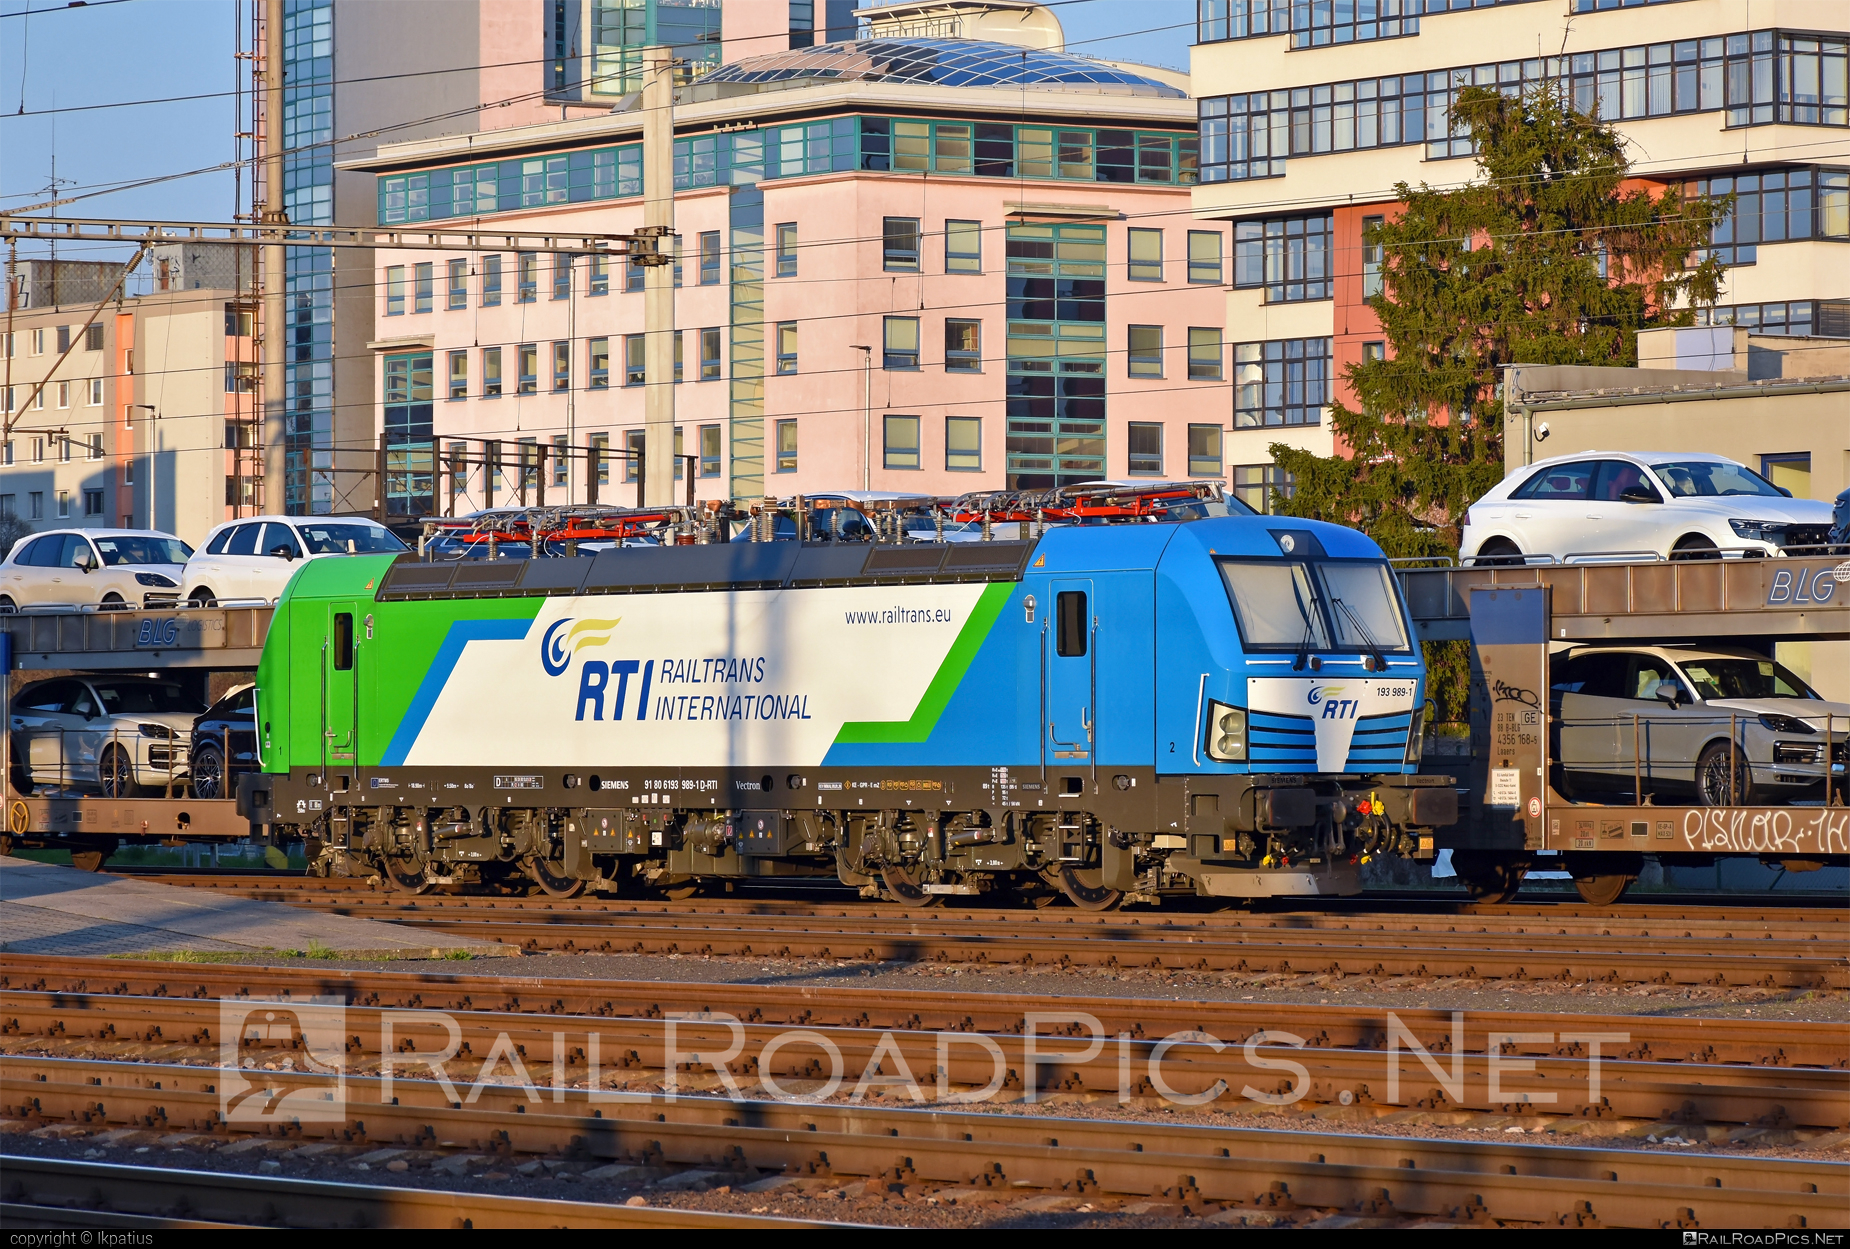 Siemens Vectron MS - 193 989-1 operated by Railtrans International, s.r.o #RailtransInternational #rti #siemens #siemensVectron #siemensVectronMS #vectron #vectronMS